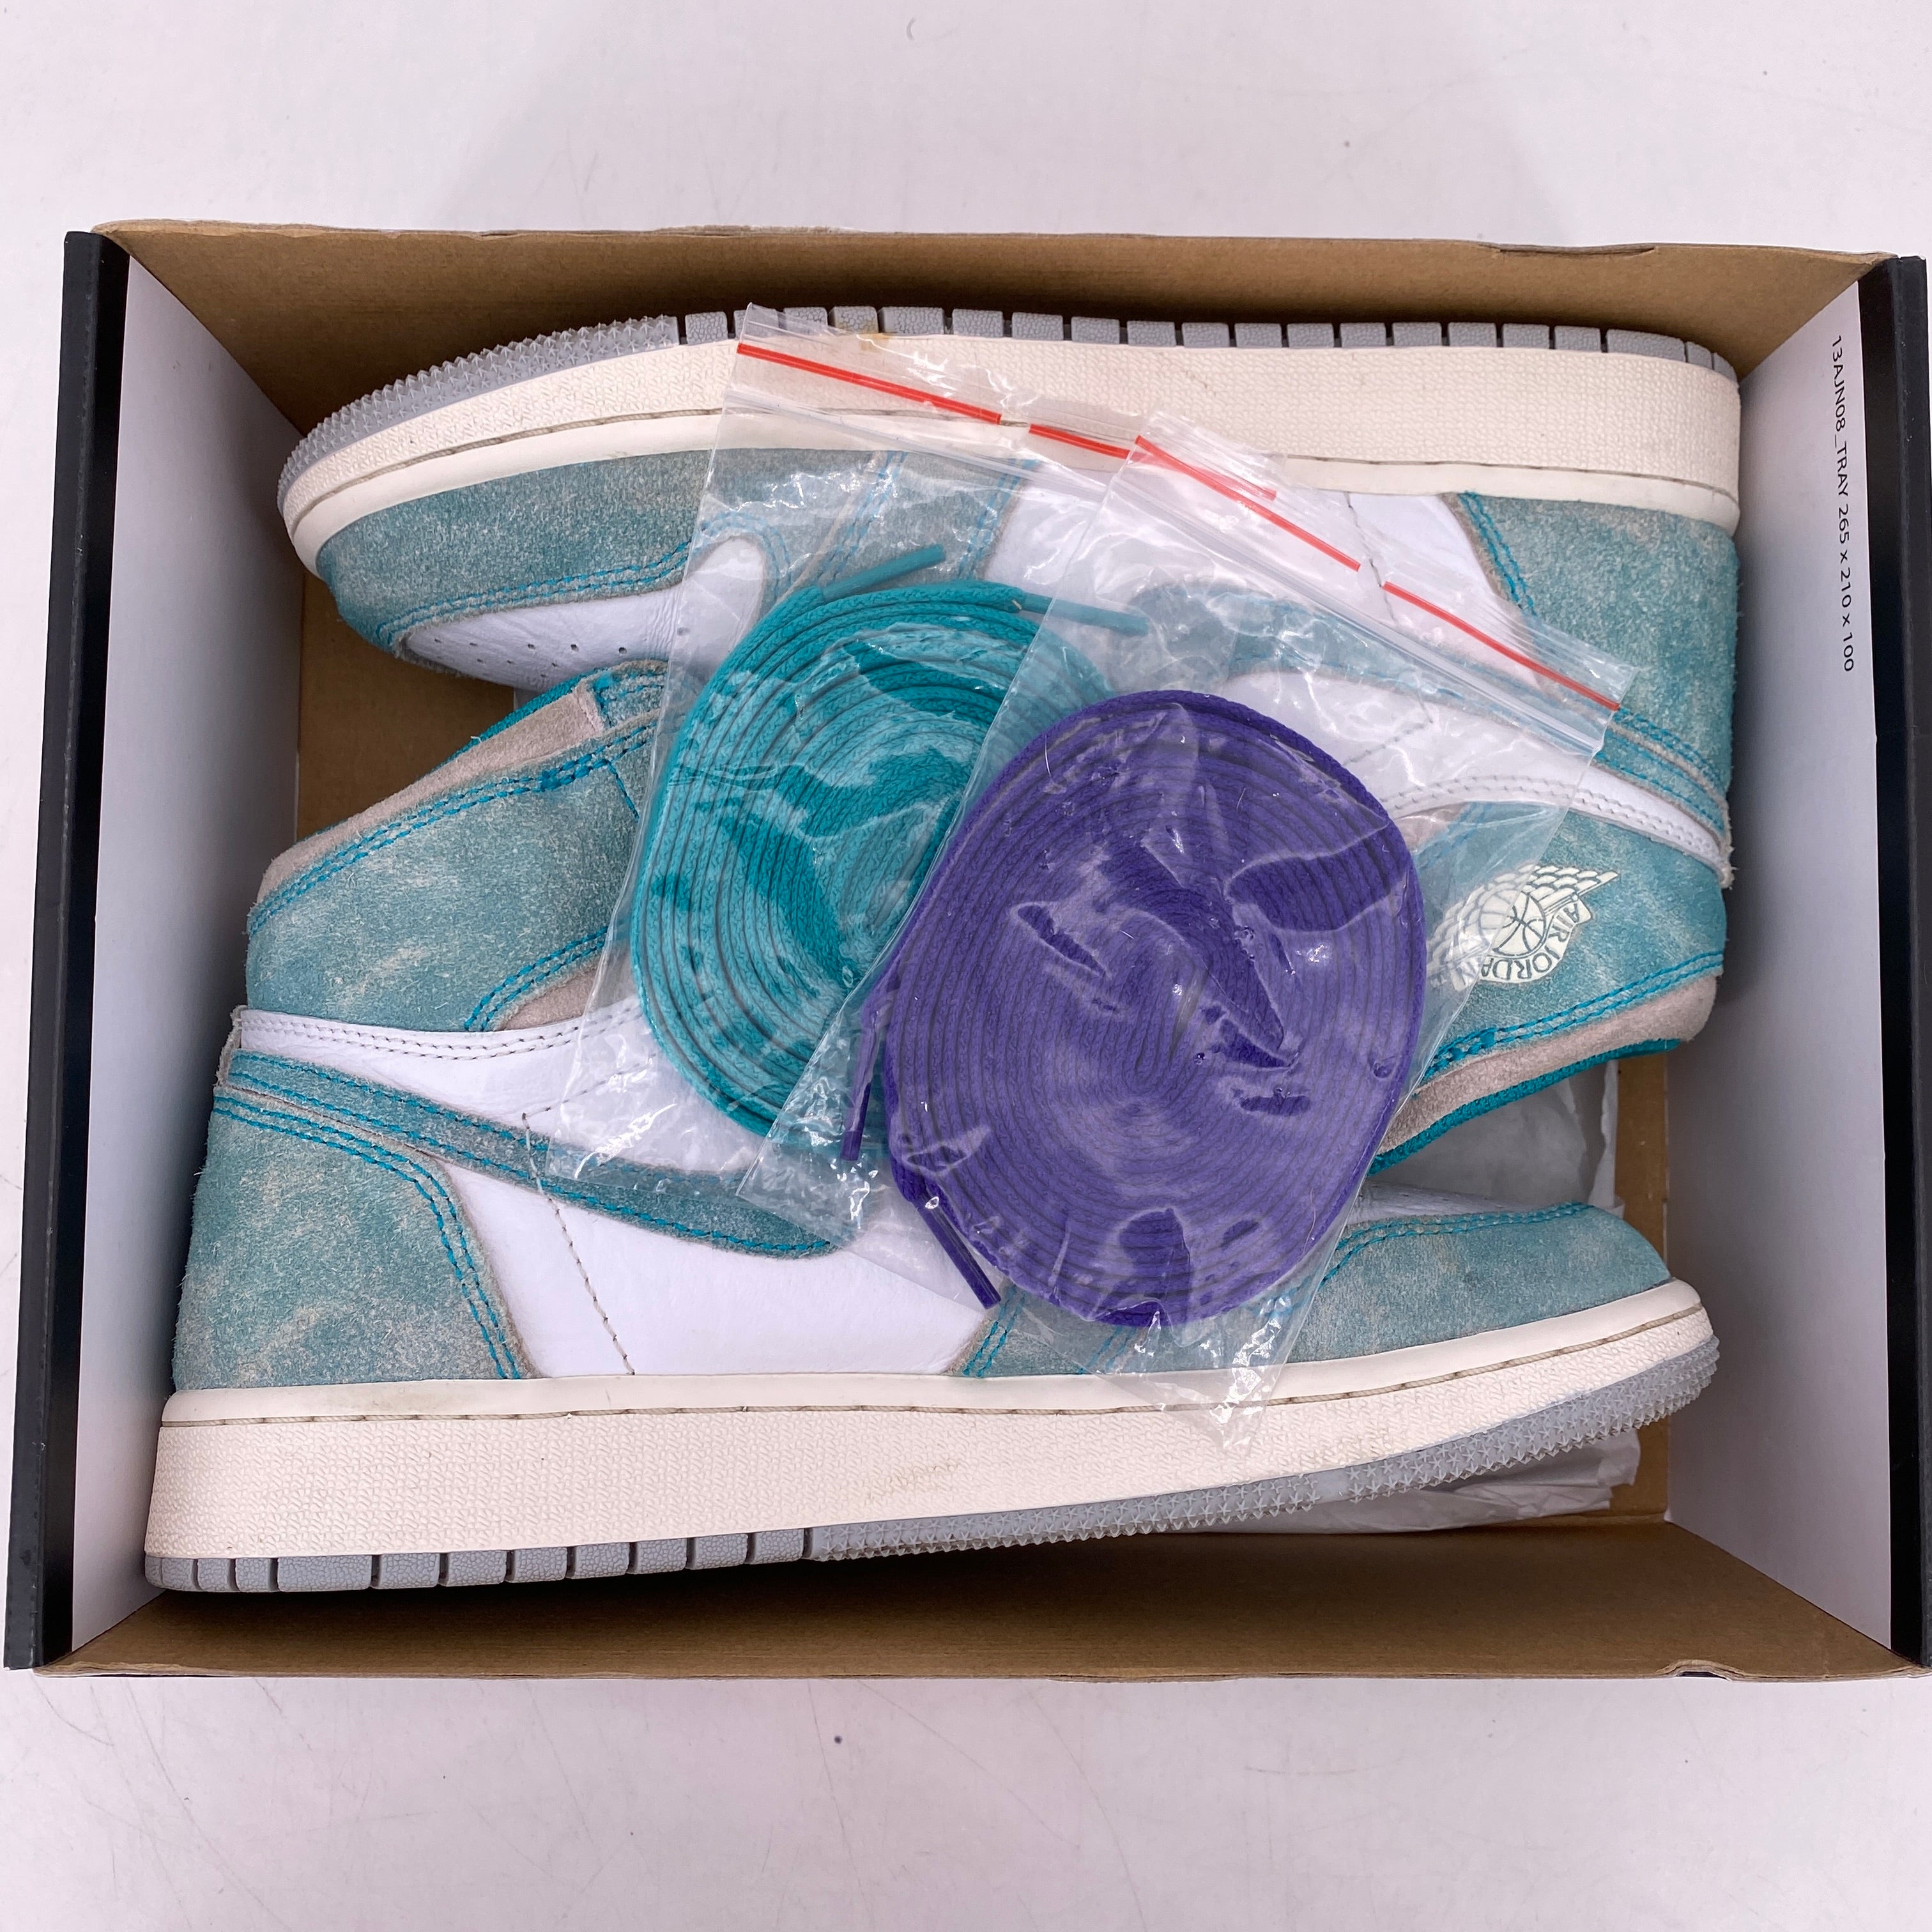 Air Jordan (GS) 1 Retro High OG &quot;Turbo Green&quot; 2019 Used Size 5Y